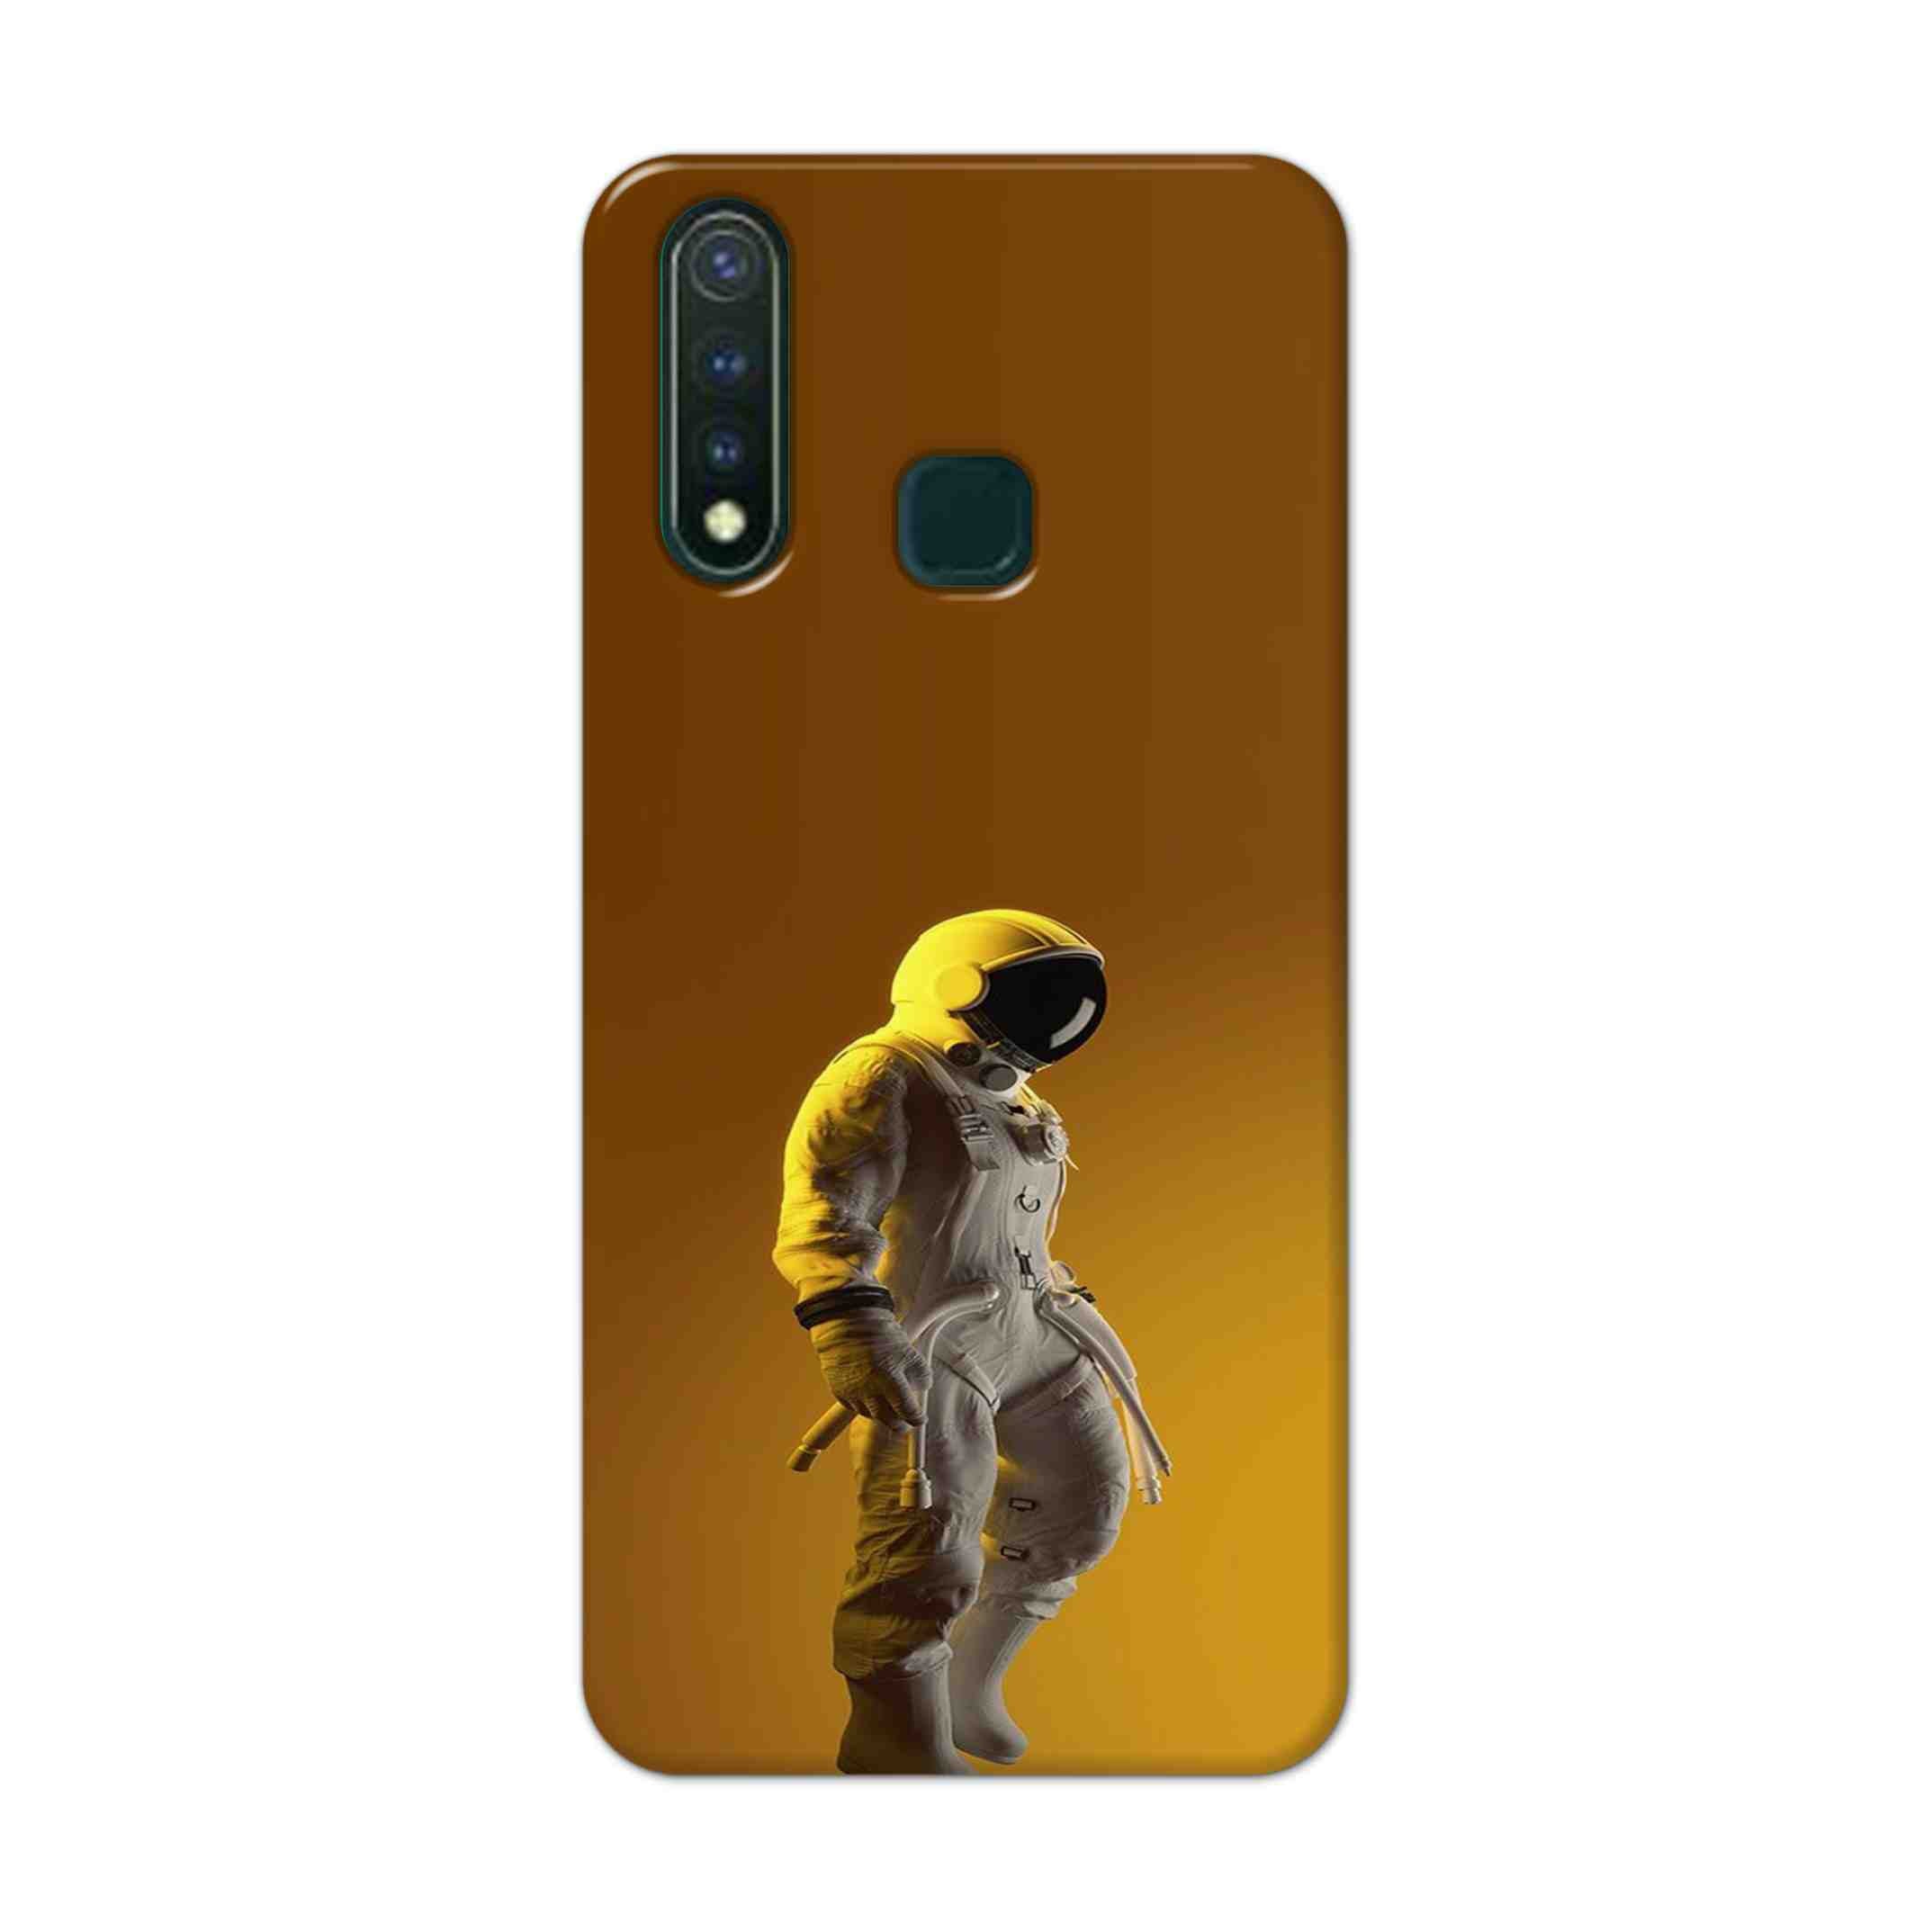 Buy Yellow Astronaut Hard Back Mobile Phone Case Cover For Vivo U20 Online